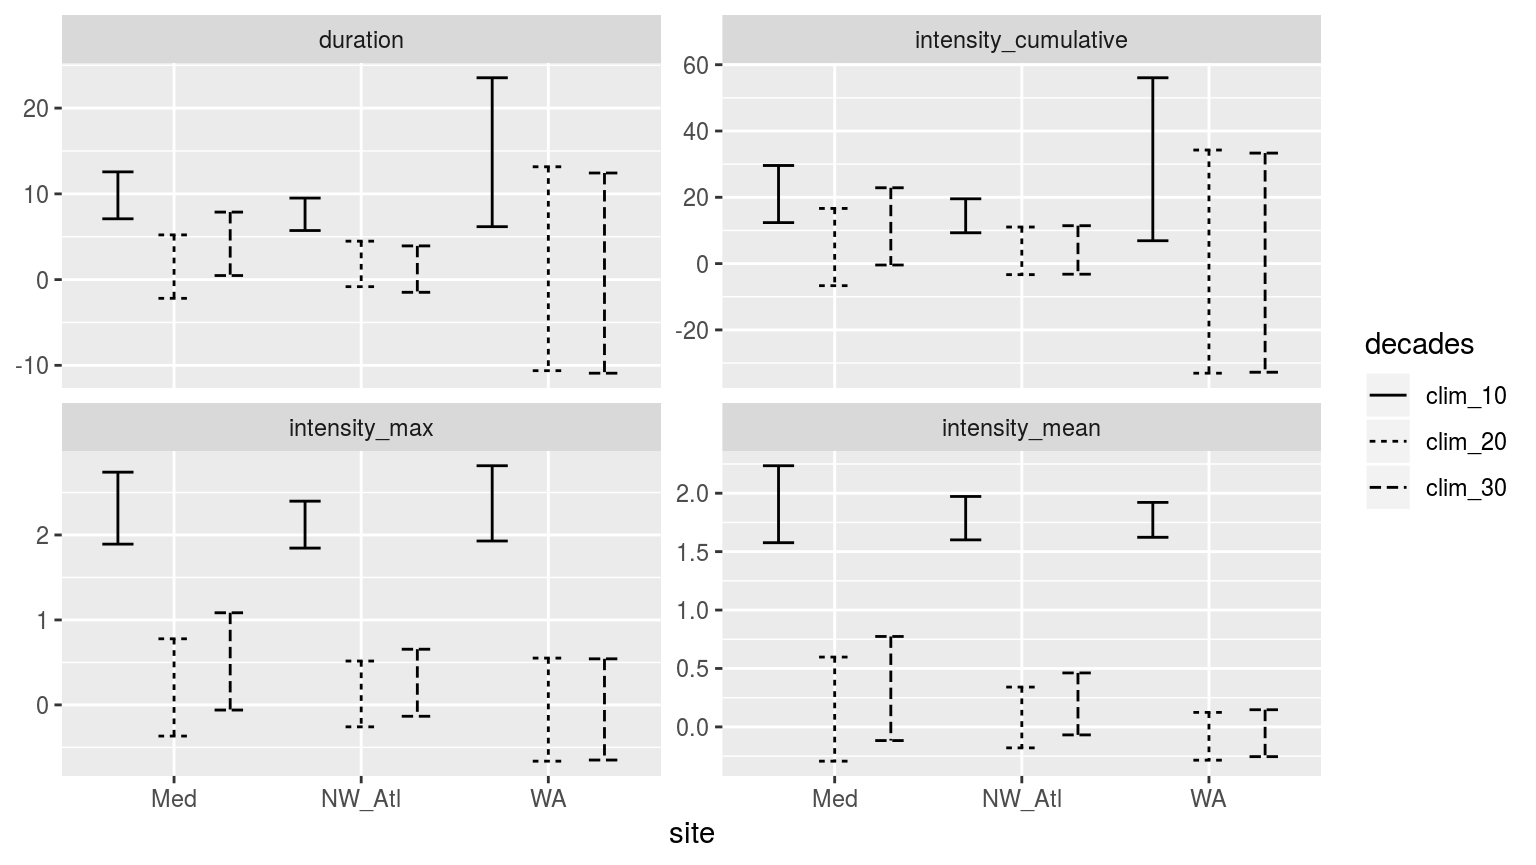 Confidence intervals of the different metrics for the three different clim periods from the population mean.